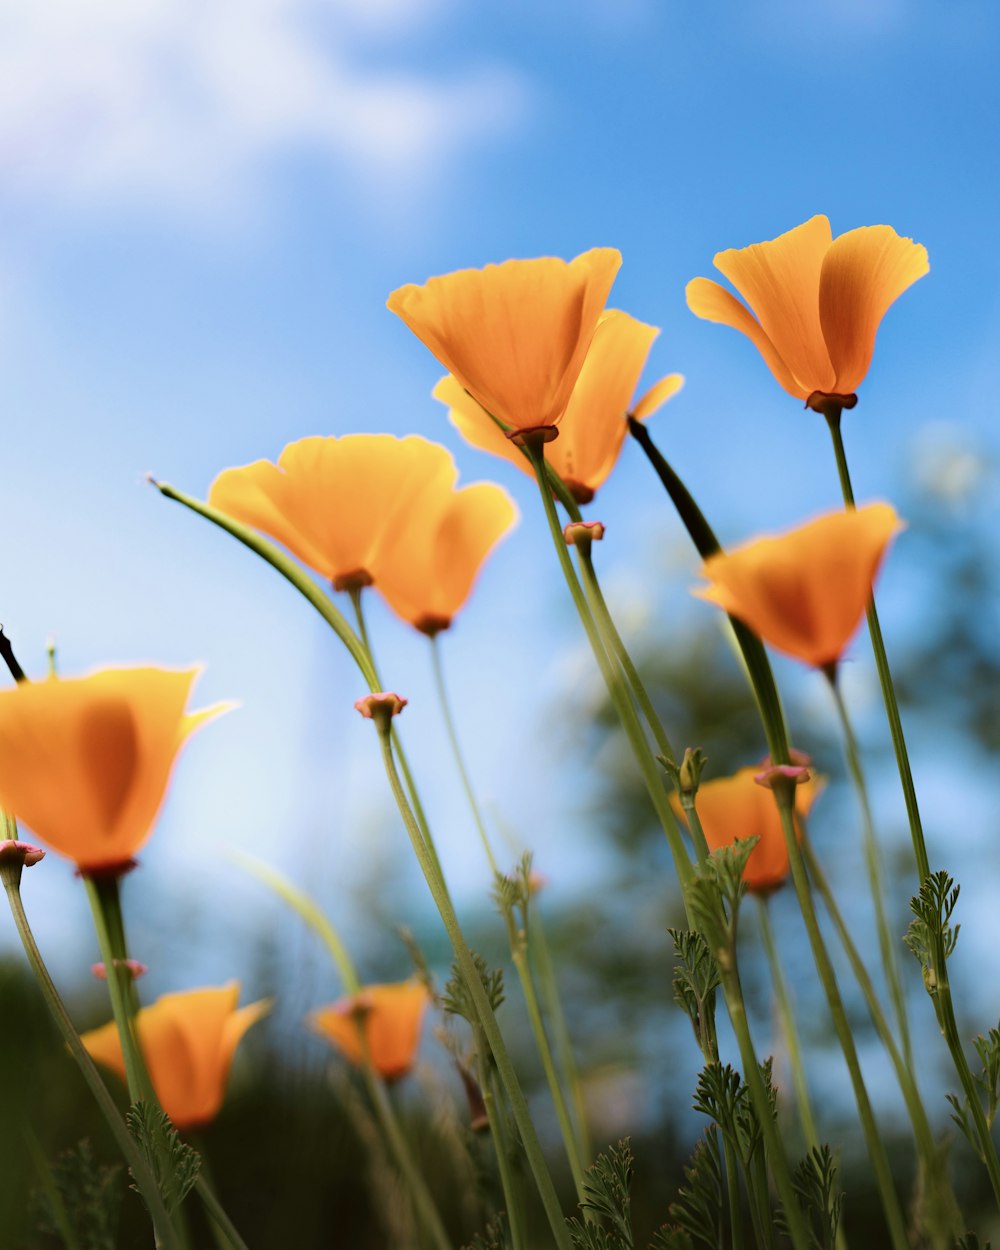 a group of orange flowers with a blue sky in the background